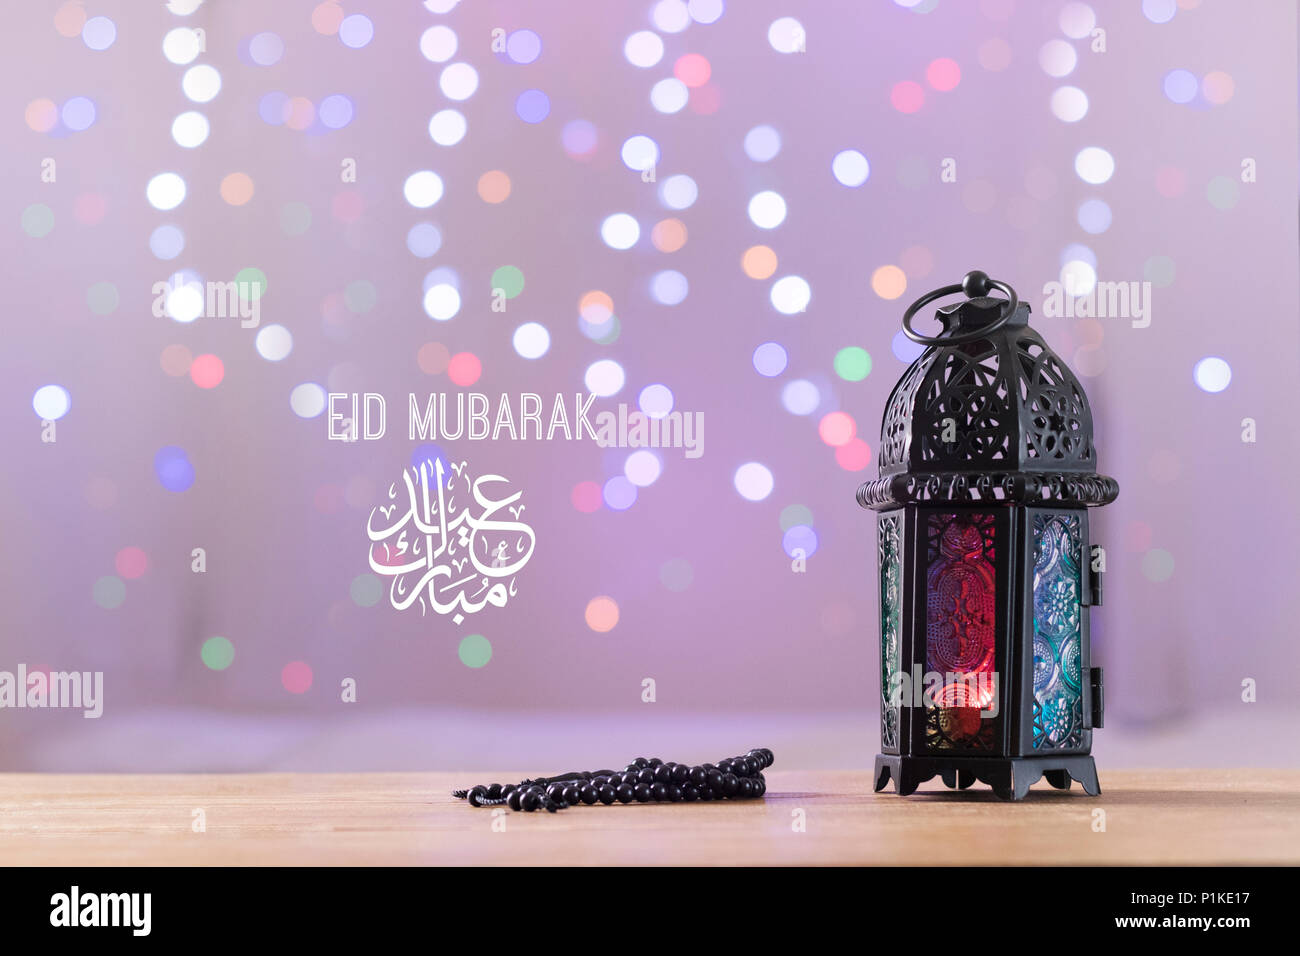 Eid al-Fitr Mubarak Greeting Typography with Bokeh backgound. Antique fanoos and Islamic Prayer Beads on wooden board Stock Photo